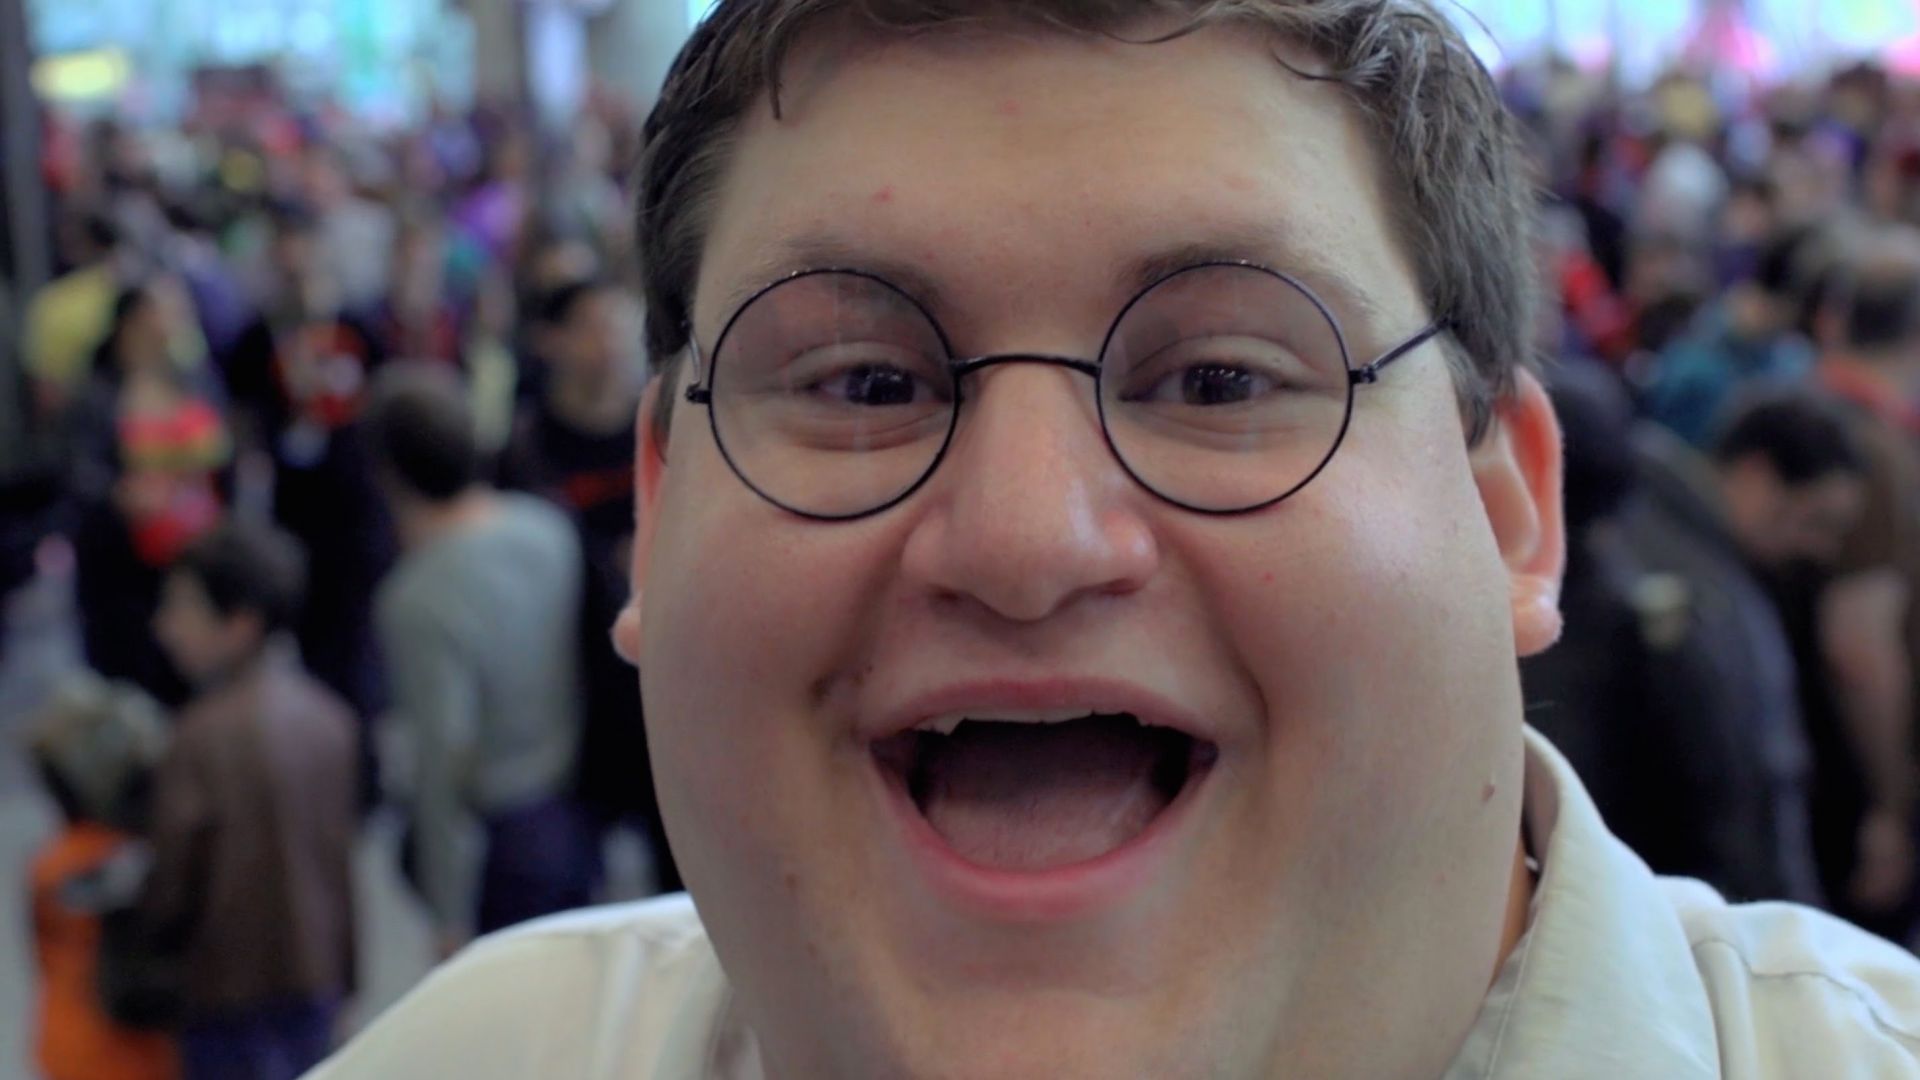 When Cartoons turn into real life: Robert Franzese the real life Peter Griffin